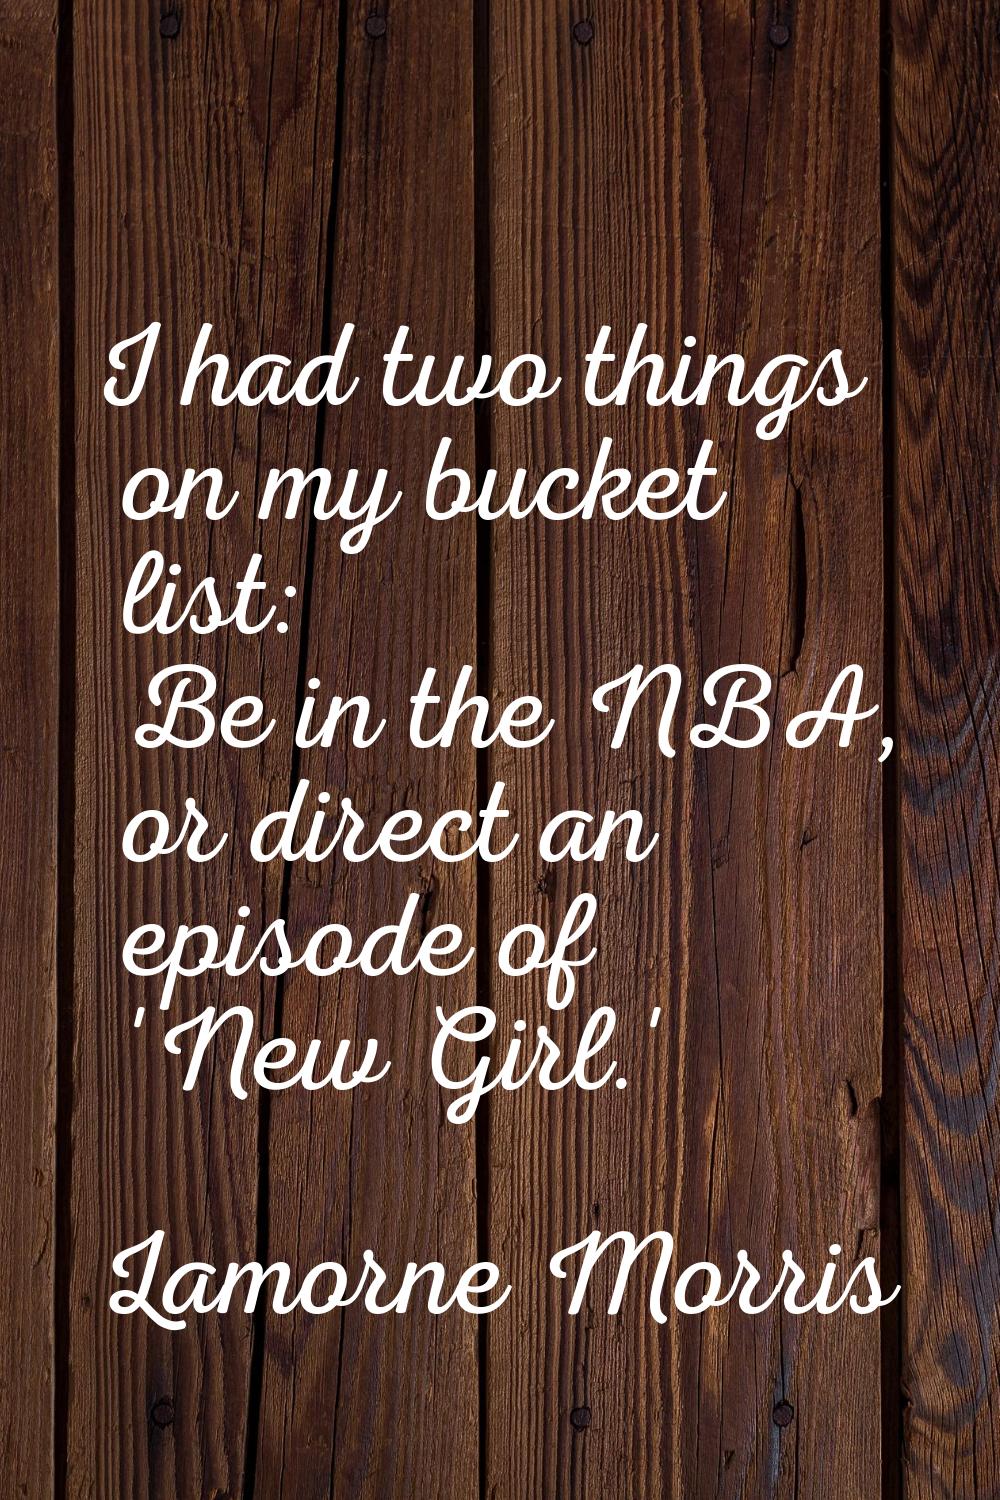 I had two things on my bucket list: Be in the NBA, or direct an episode of 'New Girl.'